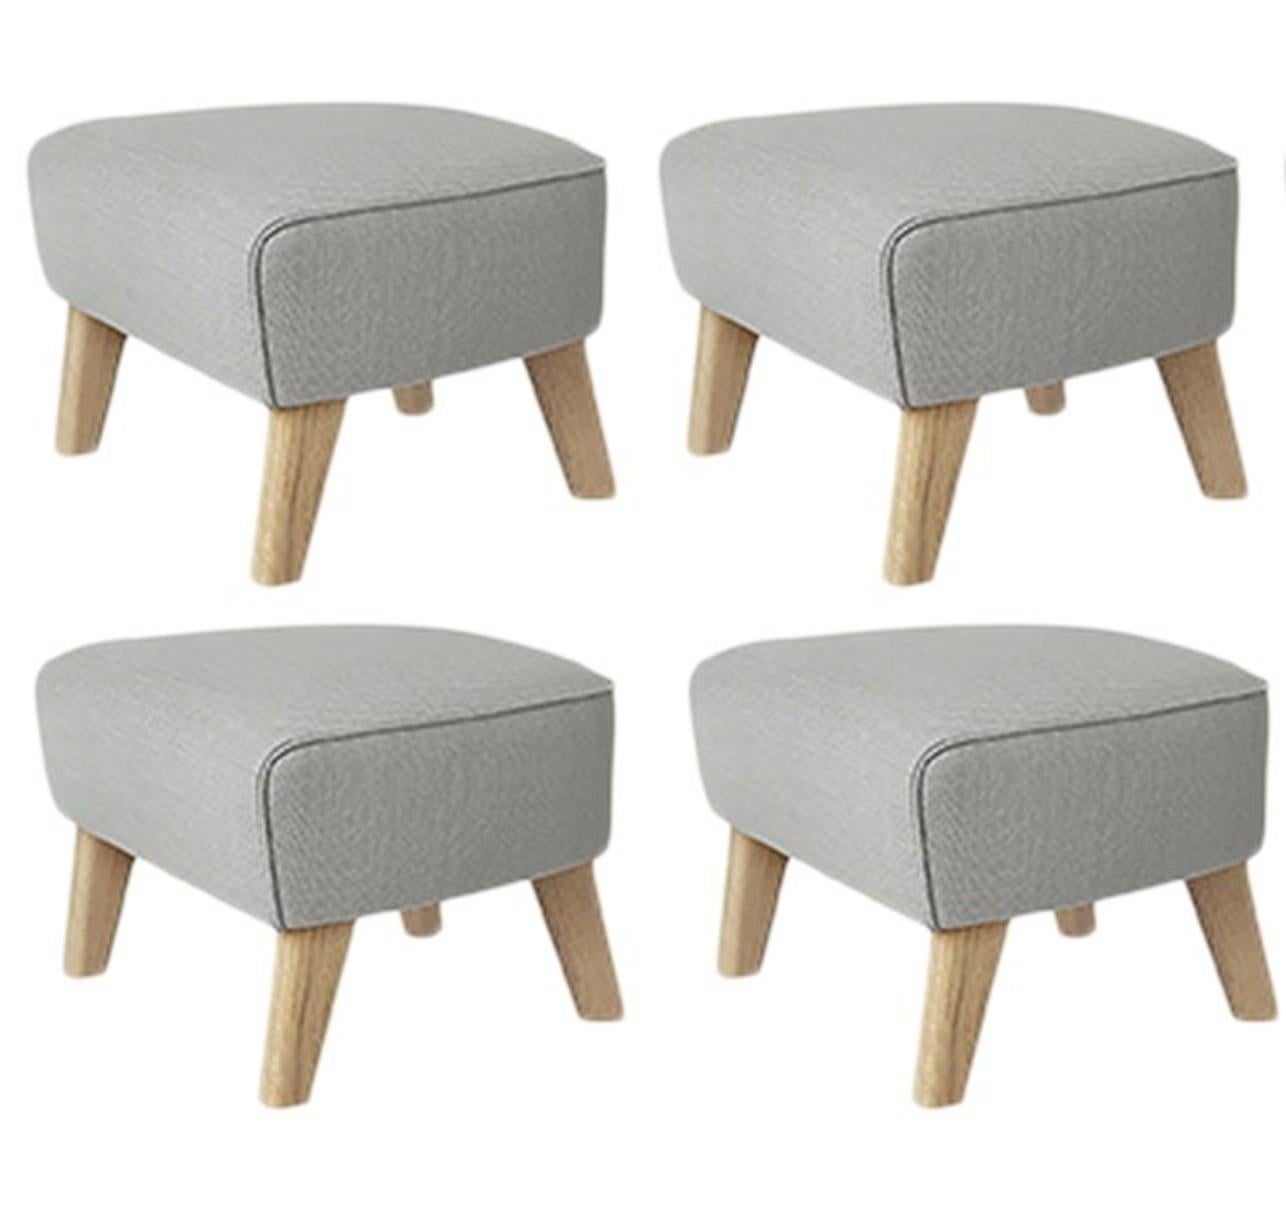 Set of 4 light grey, natural oak Raf Simons Vidar 3 my own chair footstool by Lassen
Dimensions: w 56 x d 58 x h 40 cm 
Materials: Textile
Also available: Other colors available

The my own chair footstool has been designed in the same spirit